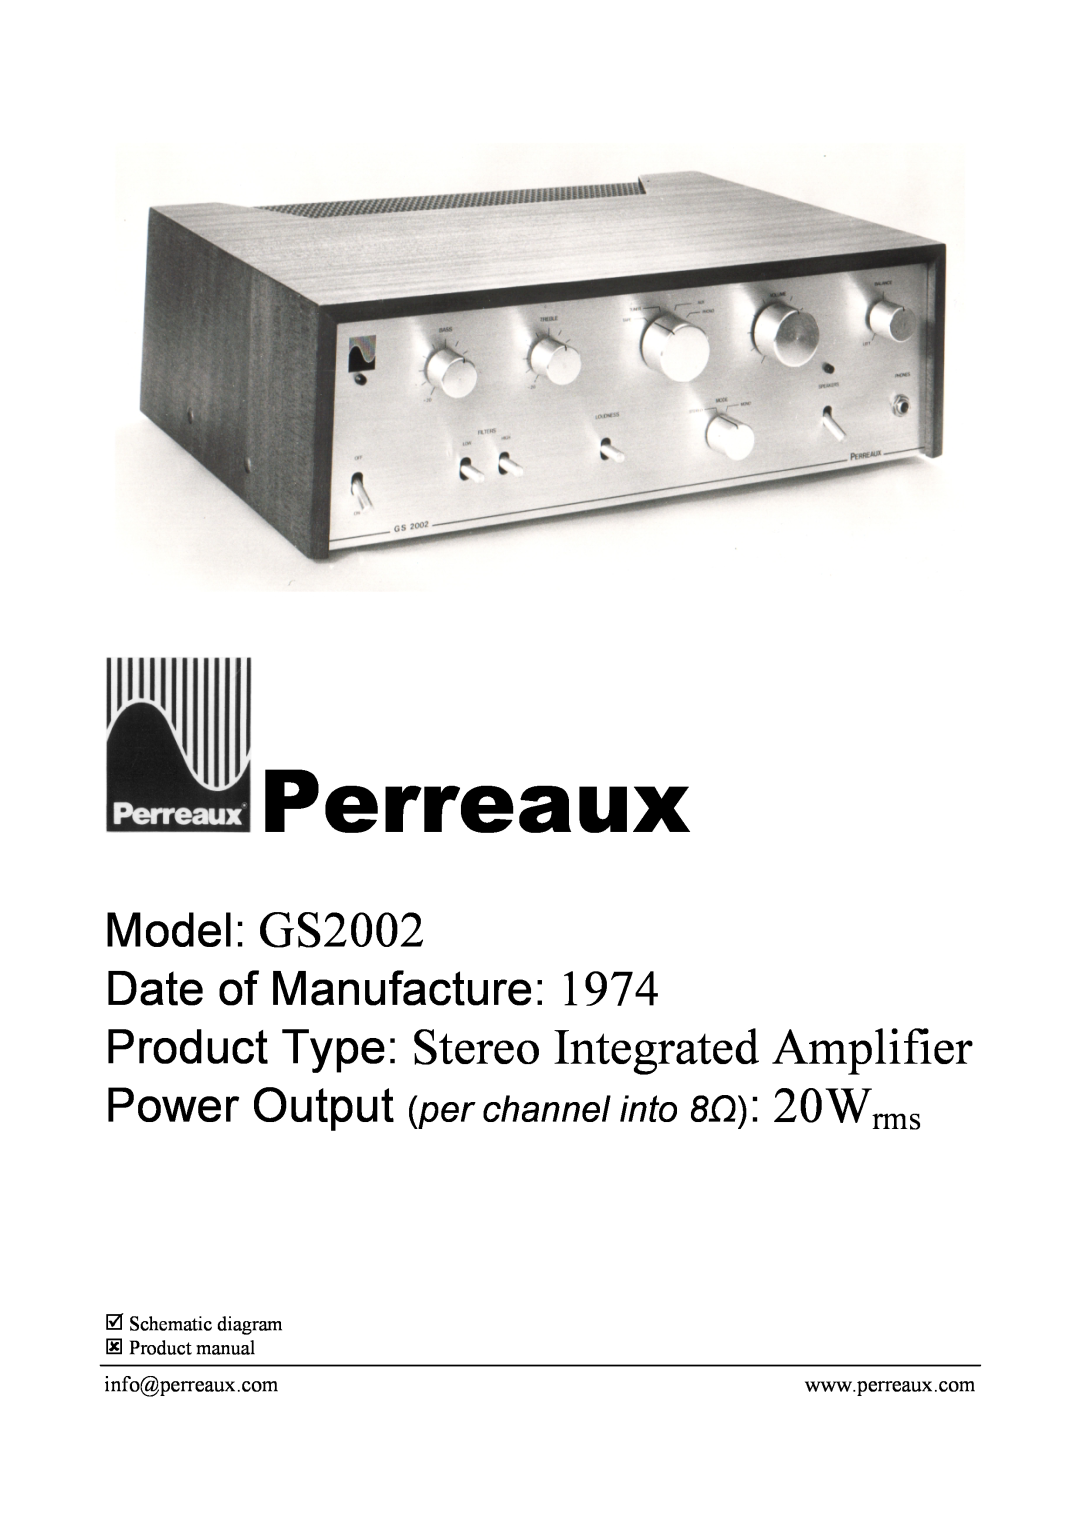 Perreaux manual Perreaux, Product Type Stereo Integrated Amplifier, Model GS2002 Date of Manufacture 